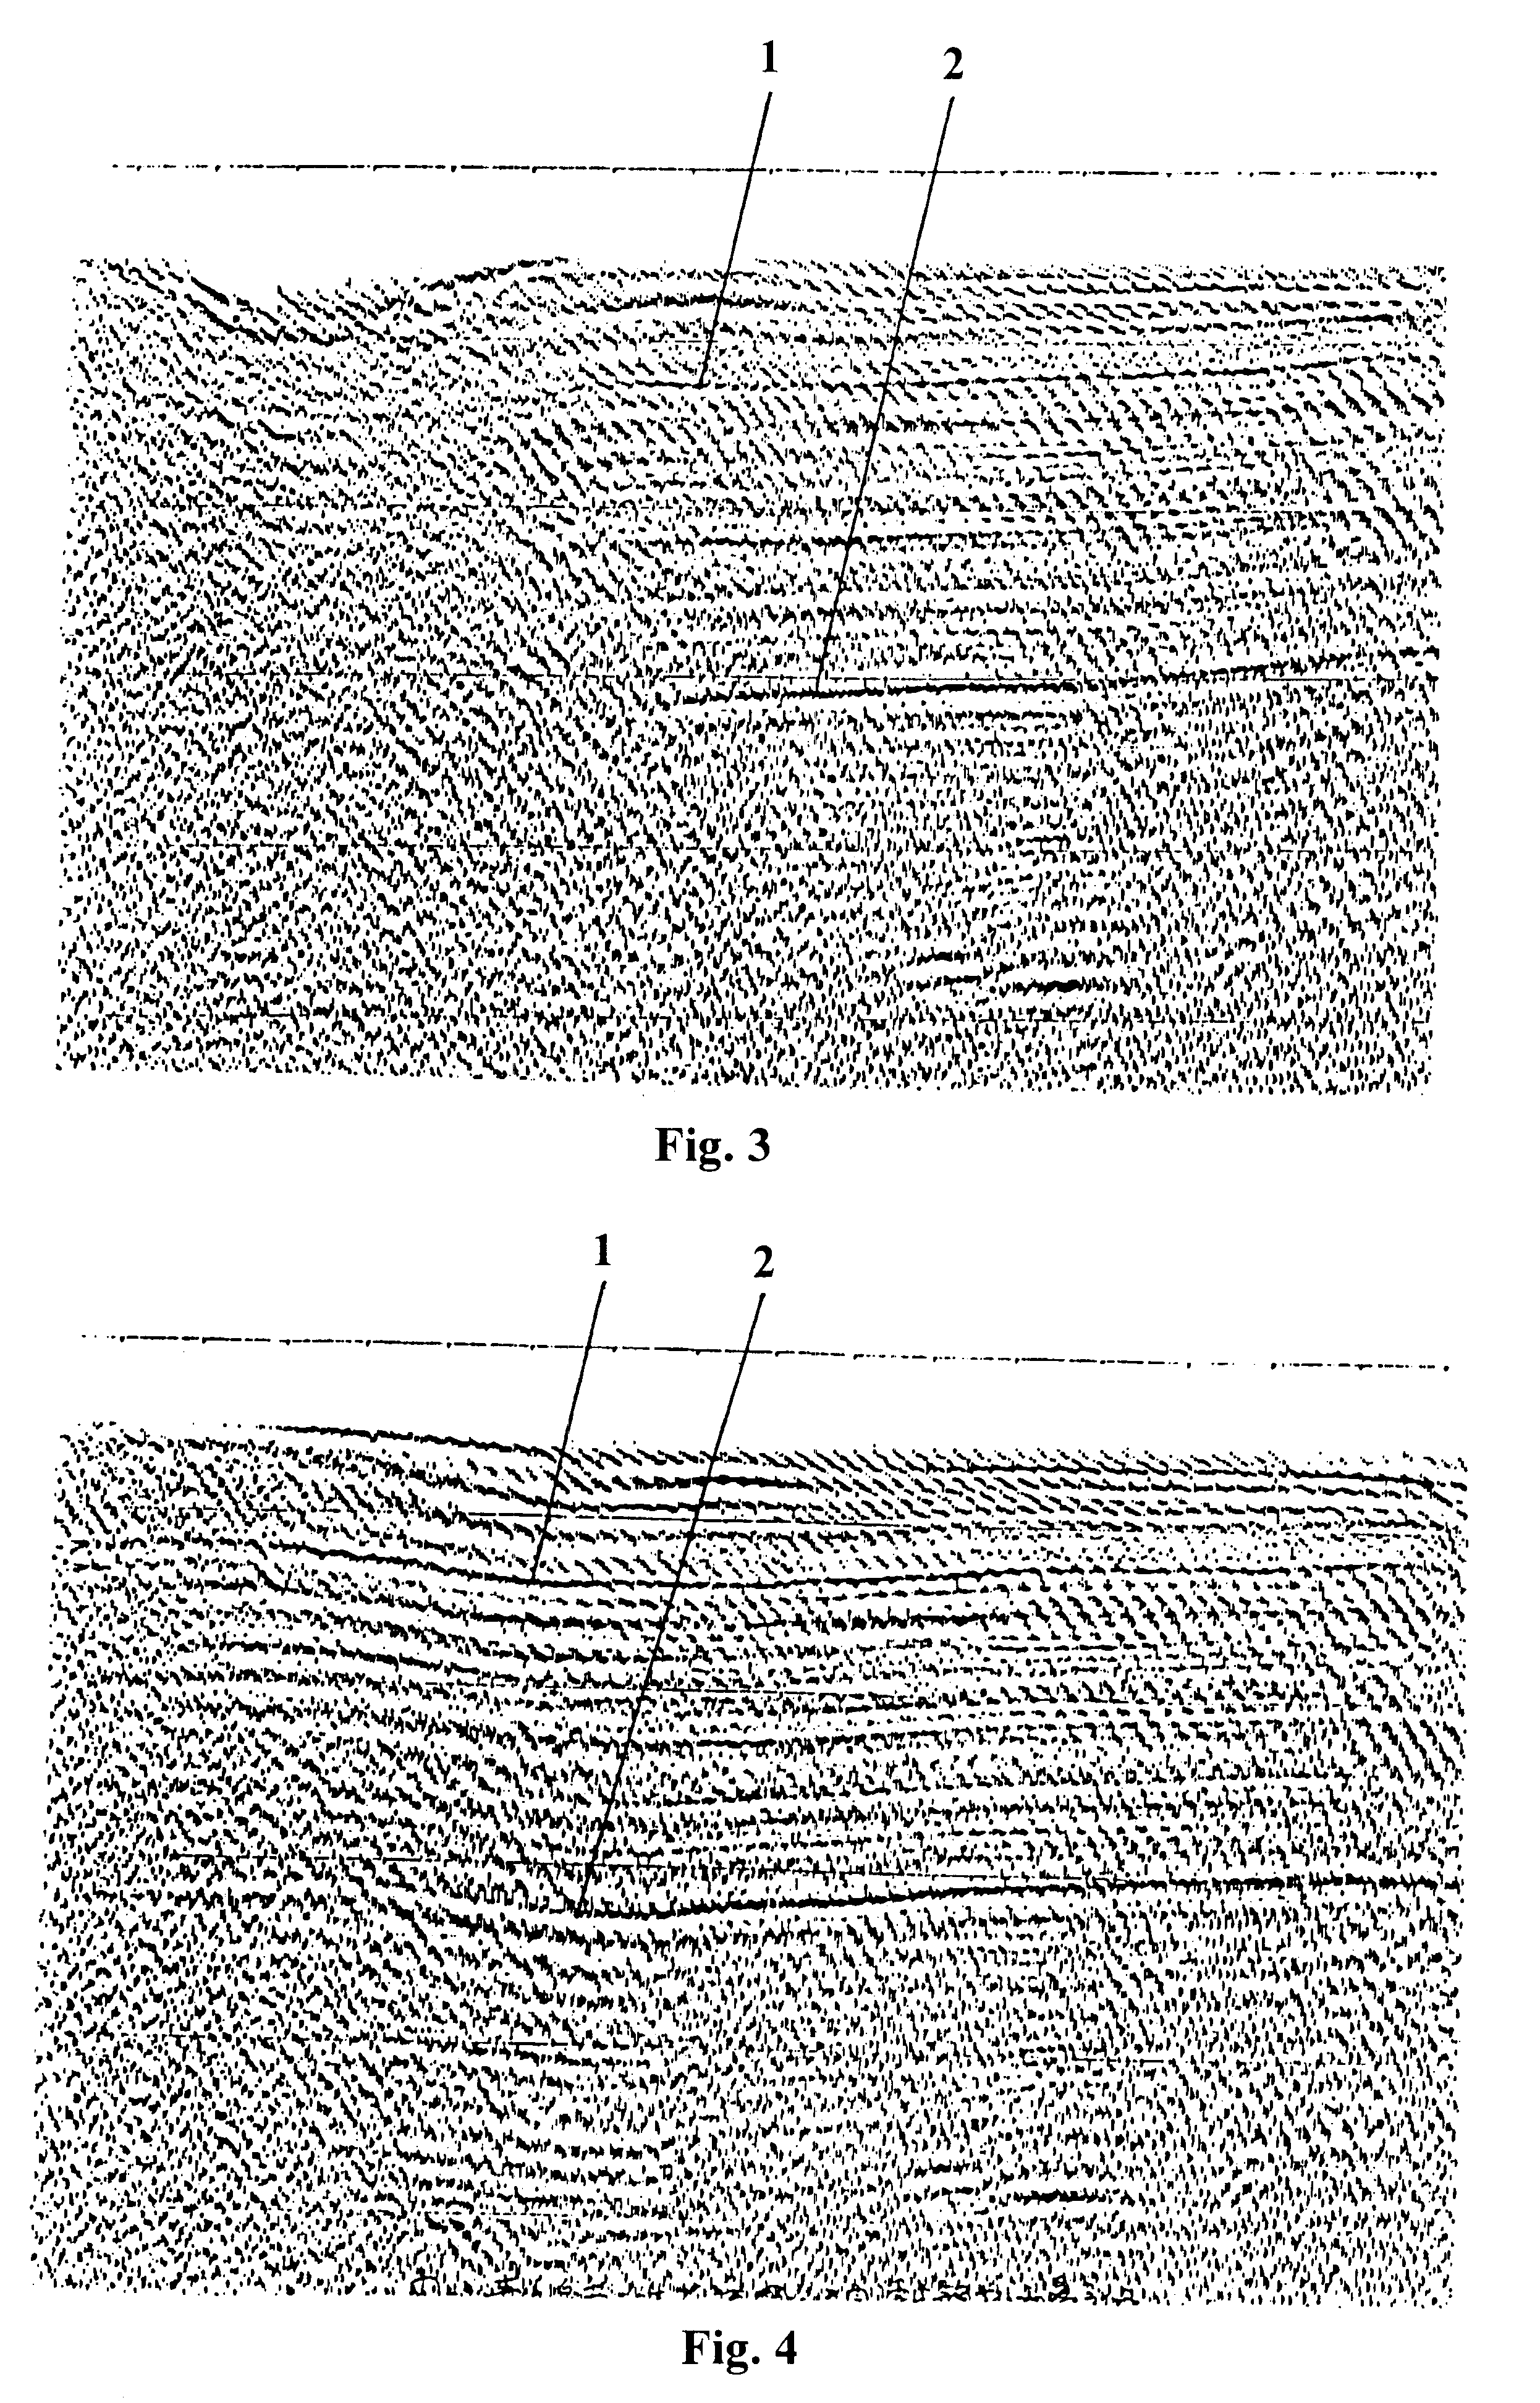 Static correction method for exploration seismic data using first arrivals of seismic waves